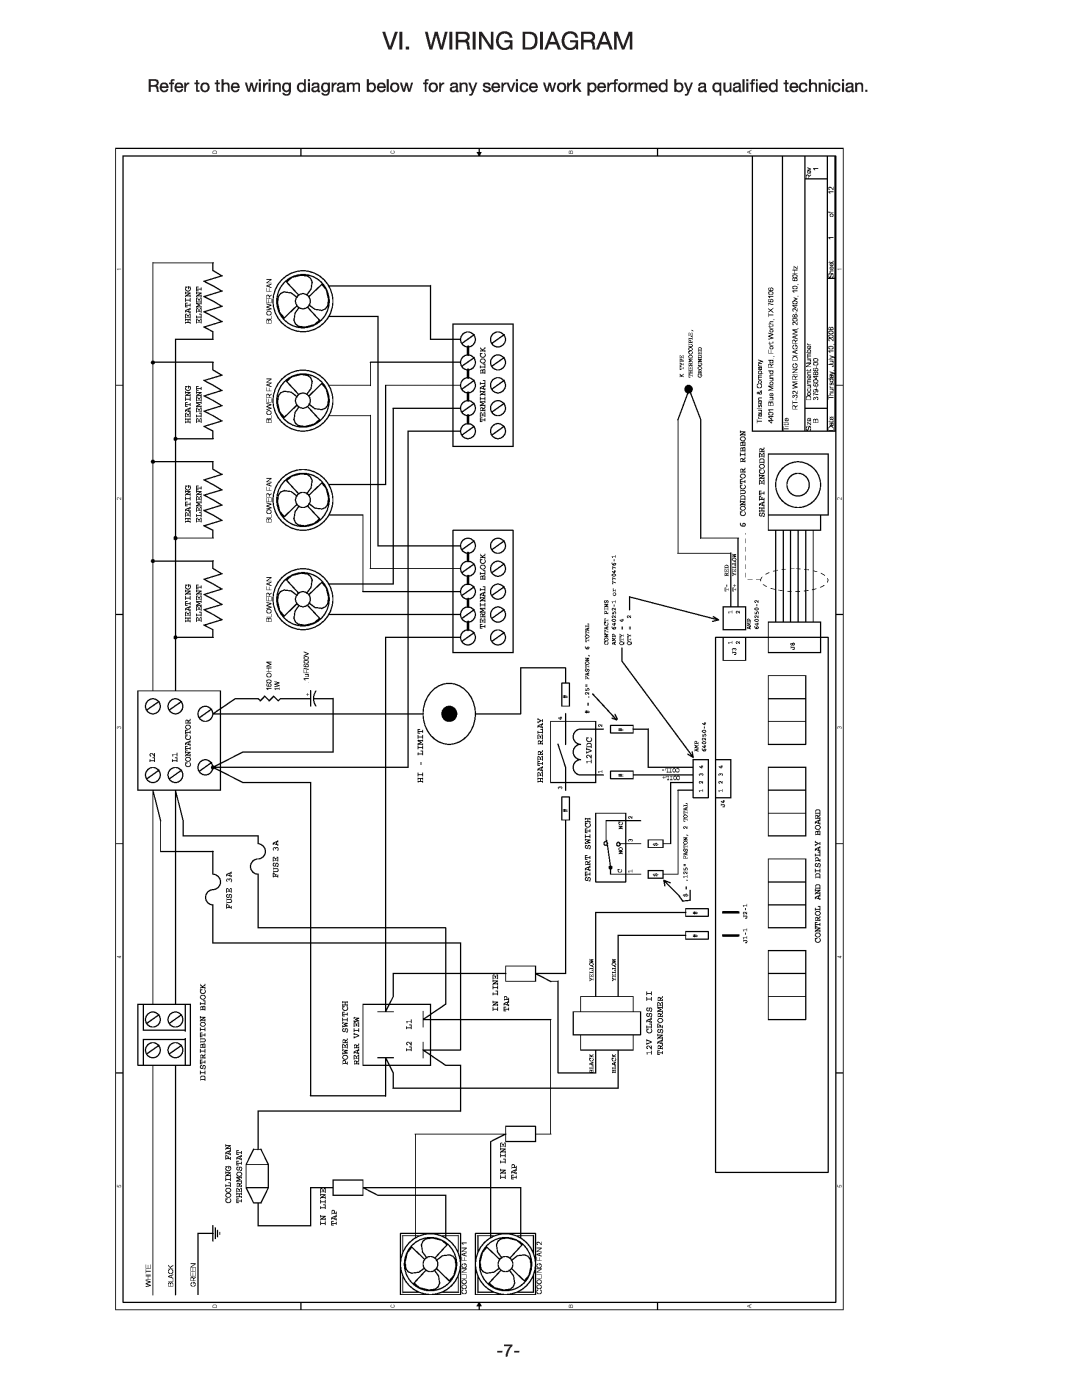 Traulsen TRT32R owner manual Wiring Diagram, Refer, wiring, diagram, below, for any service work performed by, technician 